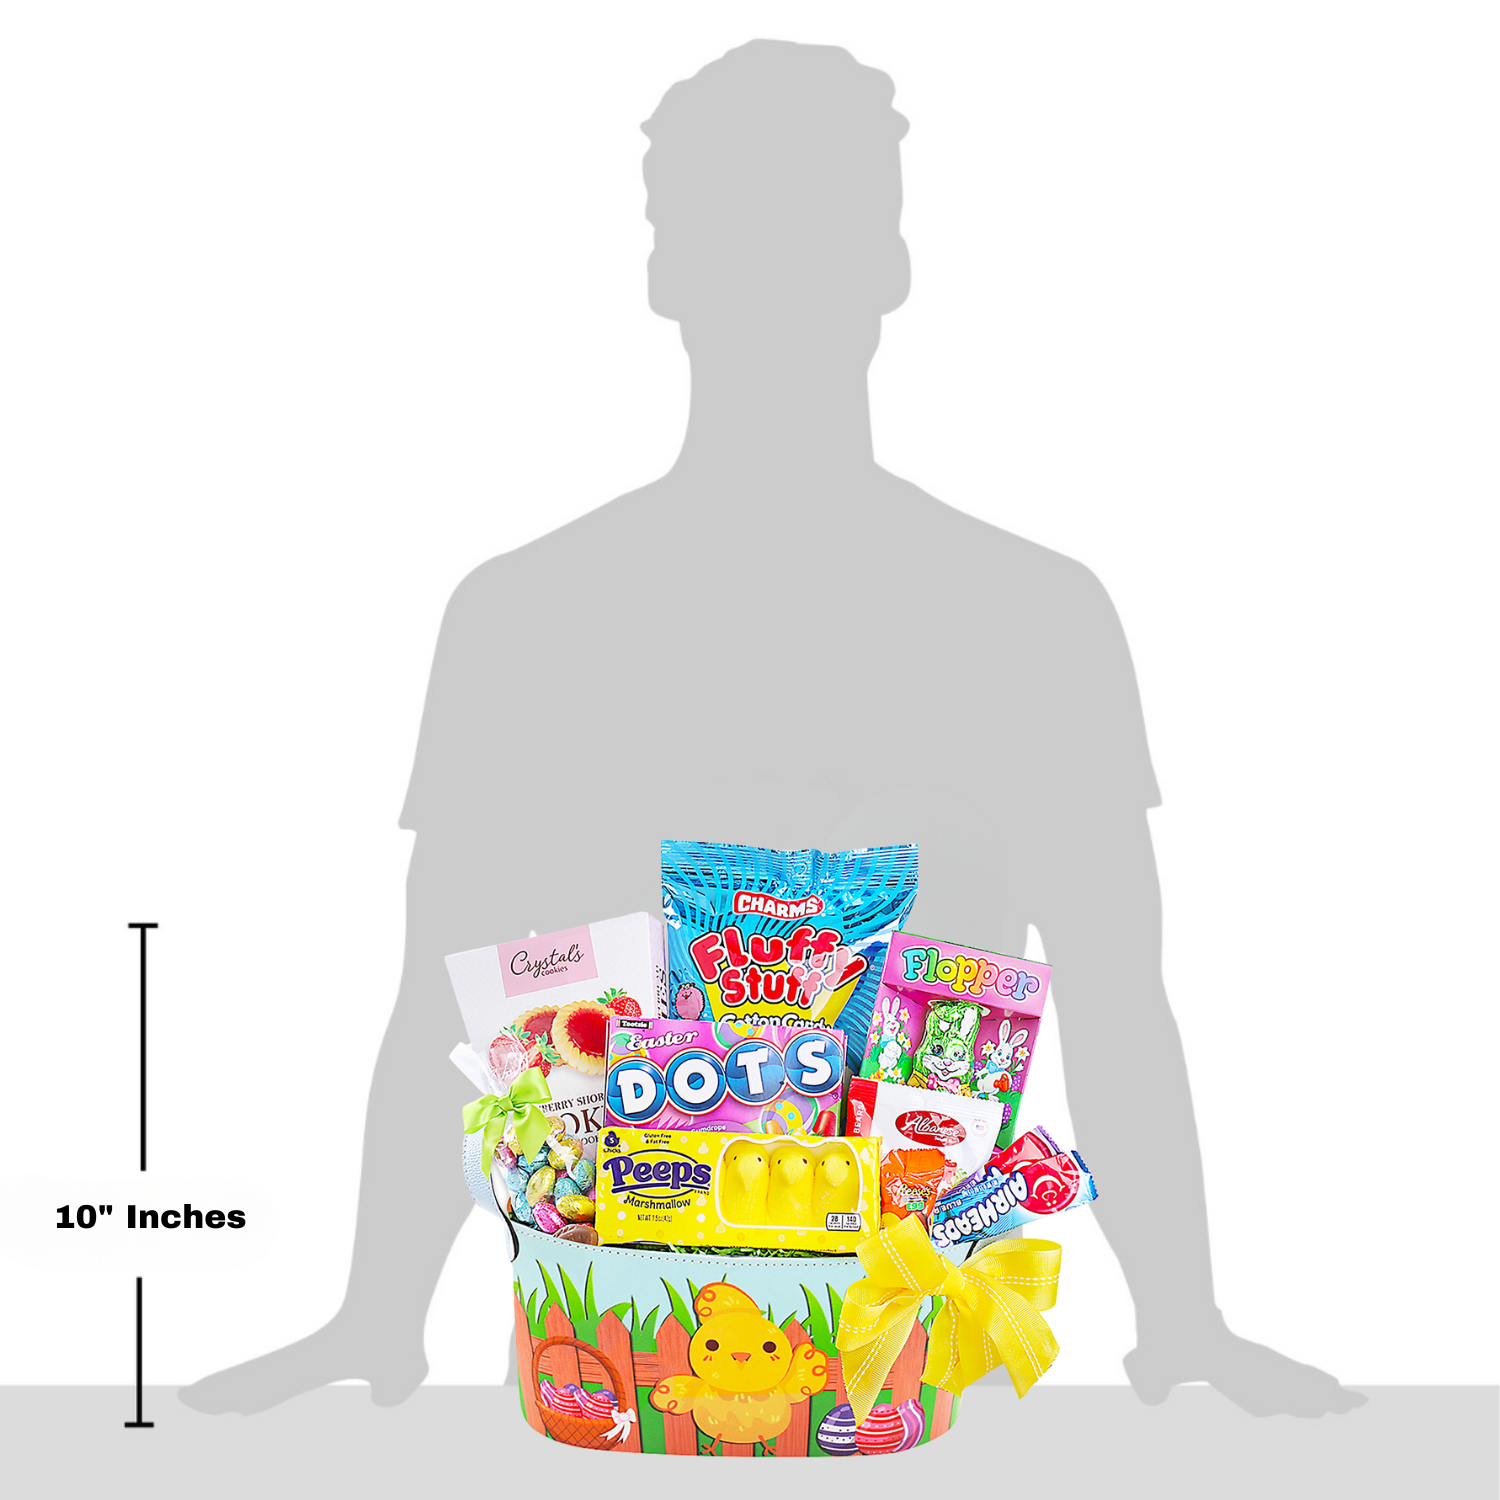 gift basket in front of grey man figure to illustrate size